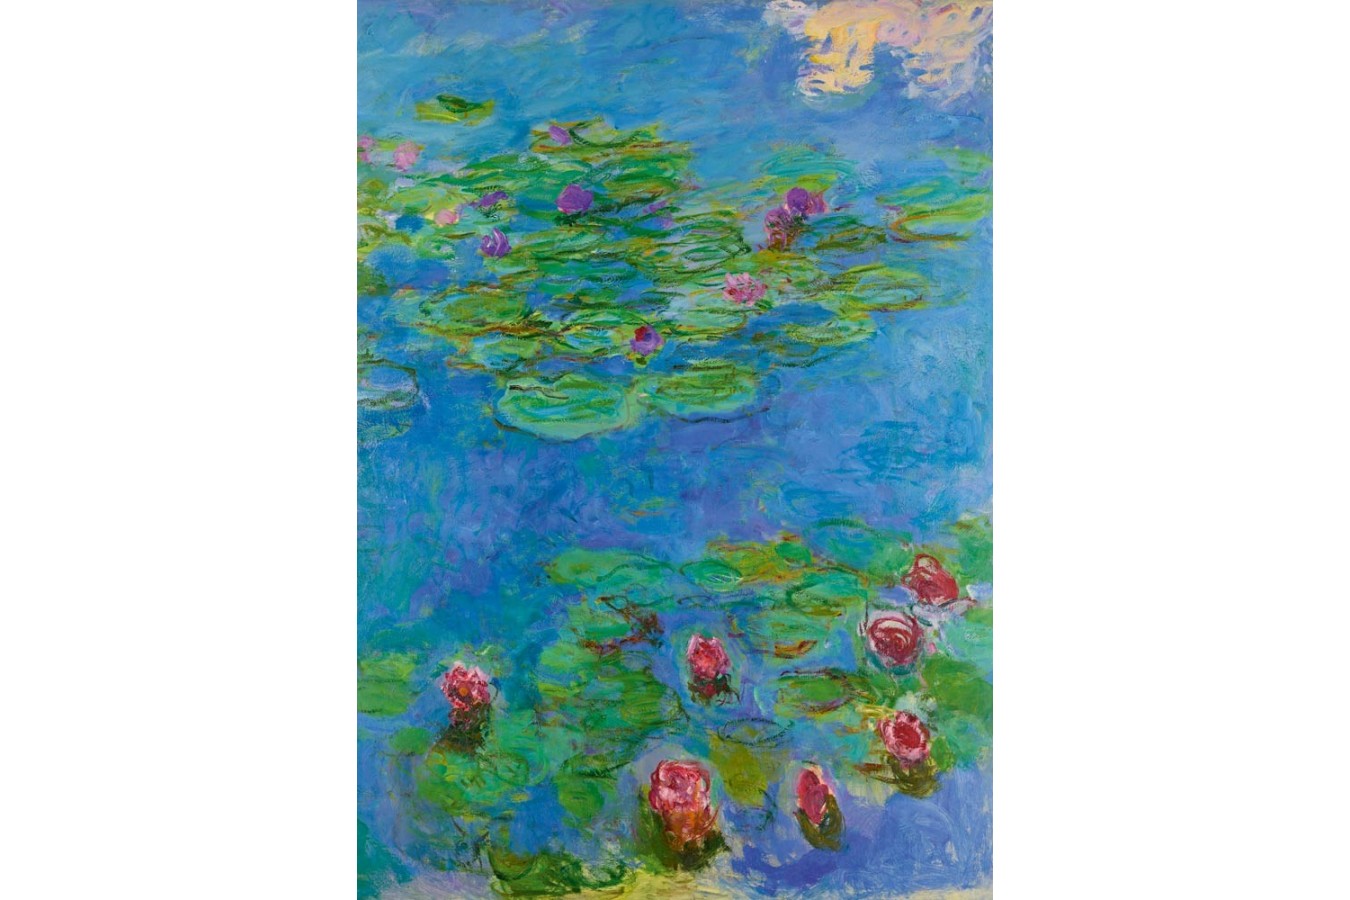 Puzzle 1000 piese - Claude Monet: Water Lilies, 1917 (Art-by-Bluebird-60062)